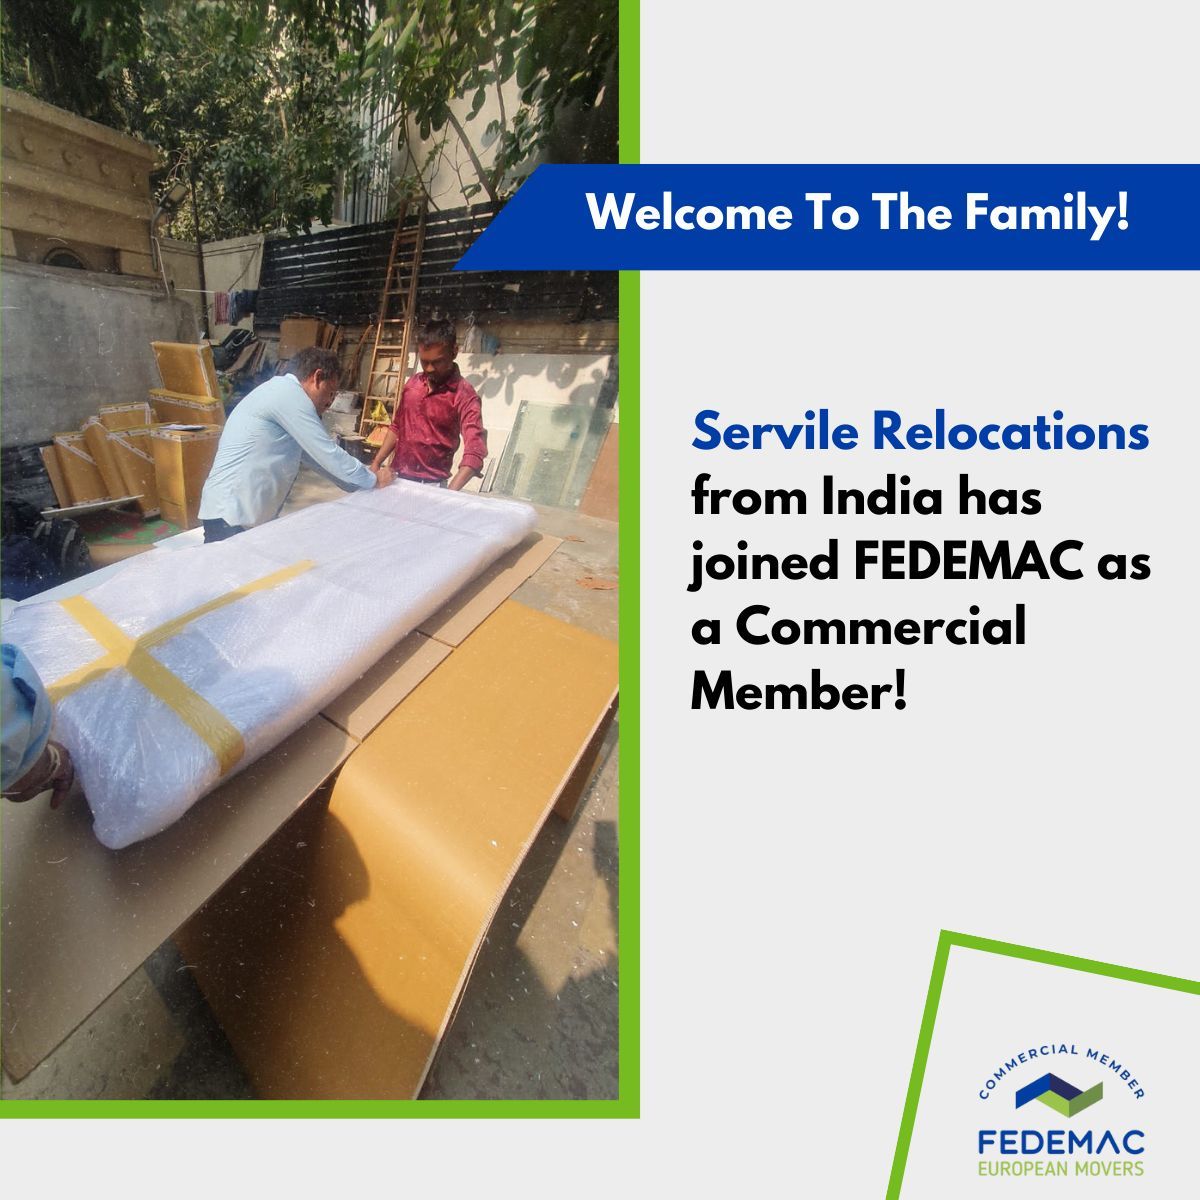 Welcome to FEDEMAC, Servile Relocations! 🌟 @servilerelocat is a trusted relocation hub in India, offering stress-free moving solutions for domestic and international moves. Exciting growth ahead with #FEDEMAC support! #Servile #RelocationServices